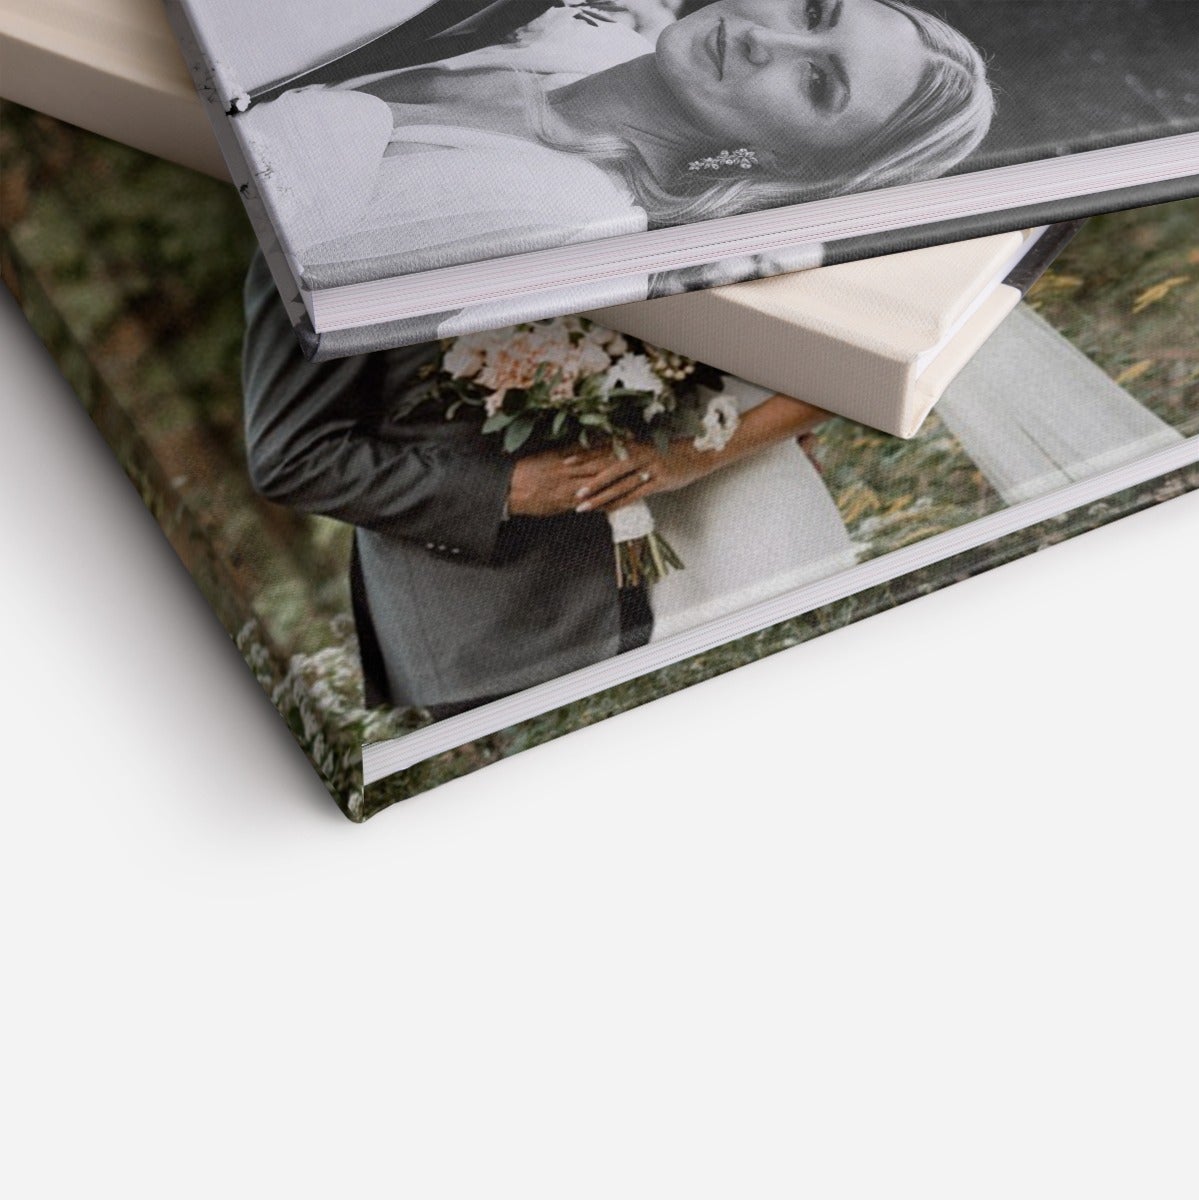 Wedding Photo-Wrapped Hardcover Book